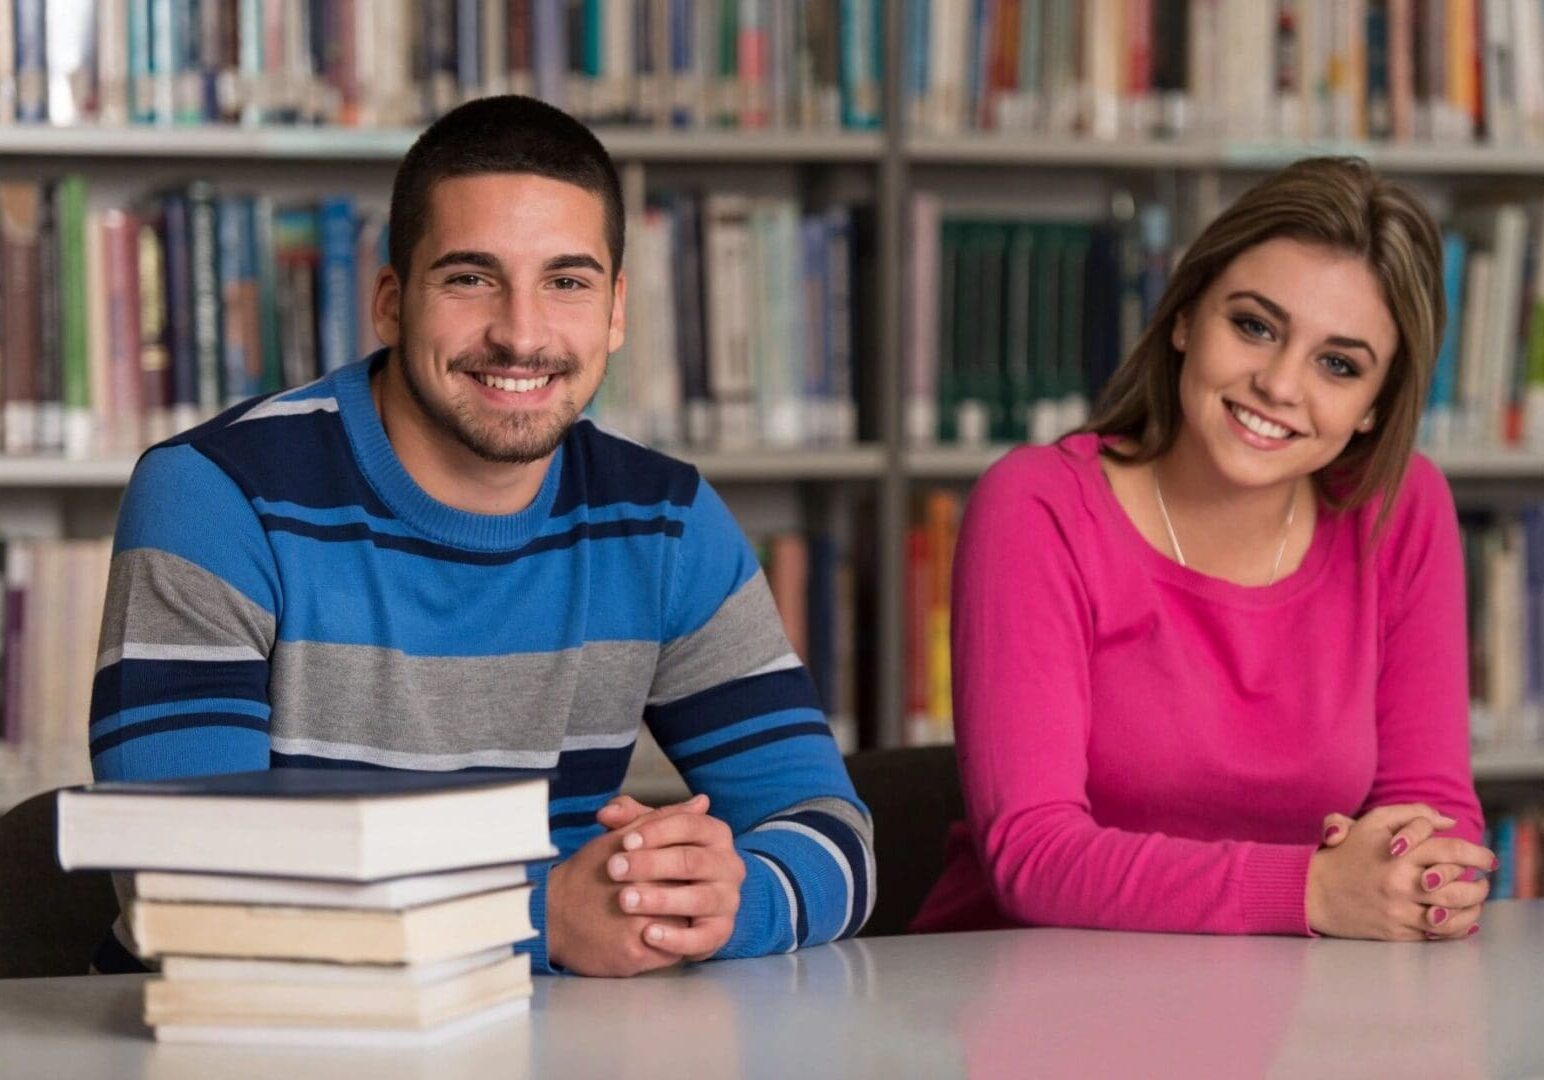 Two students smiling at the camera while sitting at a table with books in a library.